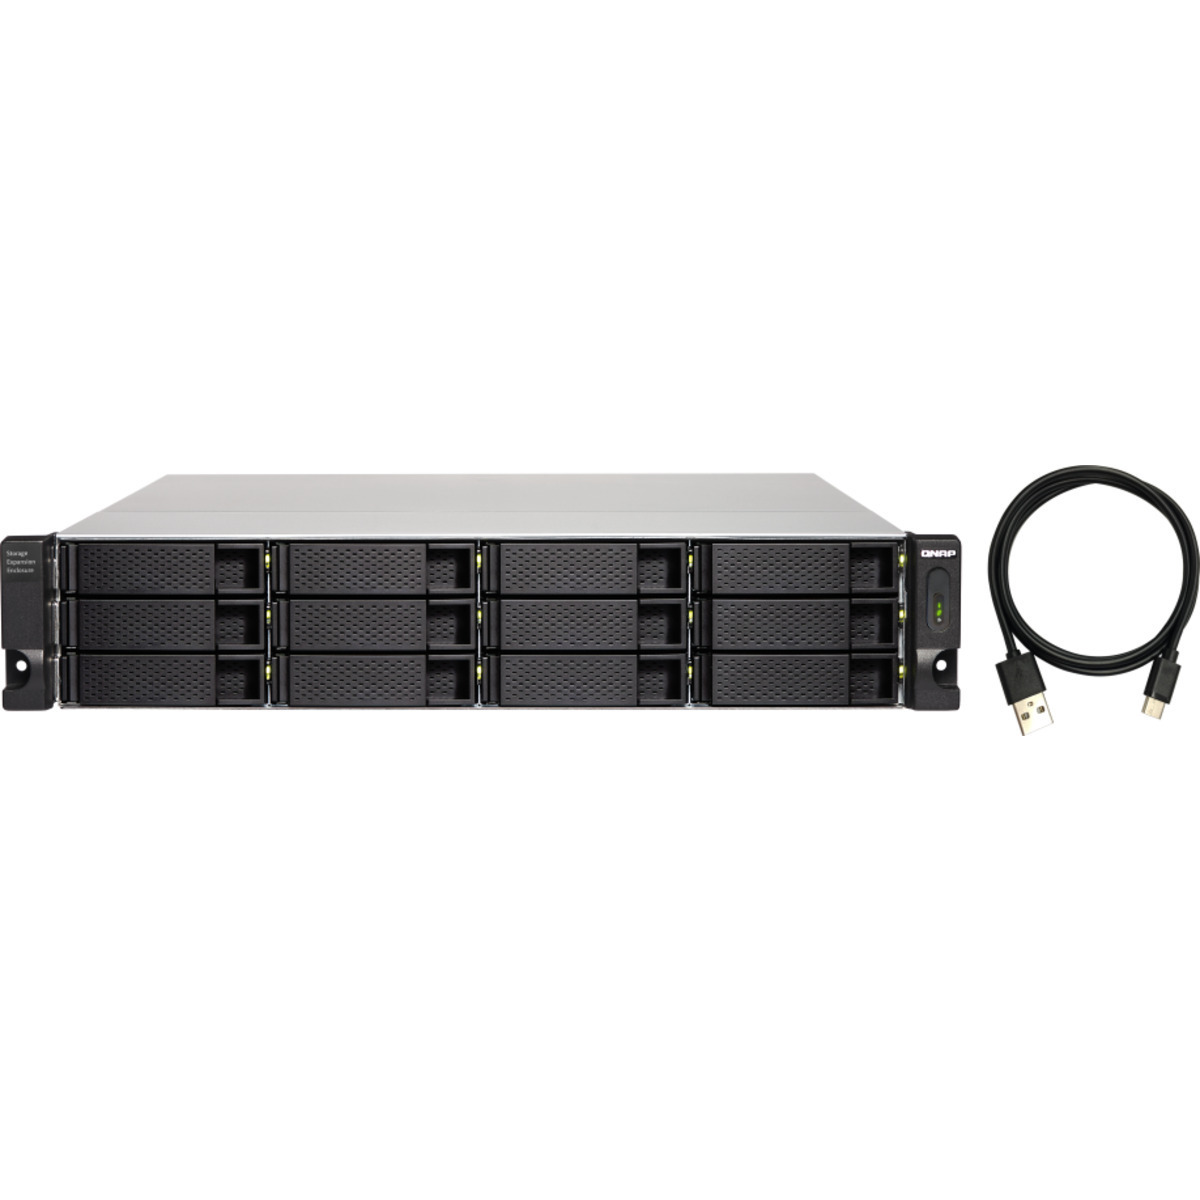 QNAP TL-R1200C-RP External Expansion Drive 154tb 12-Bay RackMount Multimedia / Power User / Business Expansion Enclosure 7x22tb Western Digital Ultrastar HC580 SED WUH722422ALE6L1 3.5 7200rpm SATA 6Gb/s HDD ENTERPRISE Class Drives Installed - Burn-In Tested TL-R1200C-RP External Expansion Drive